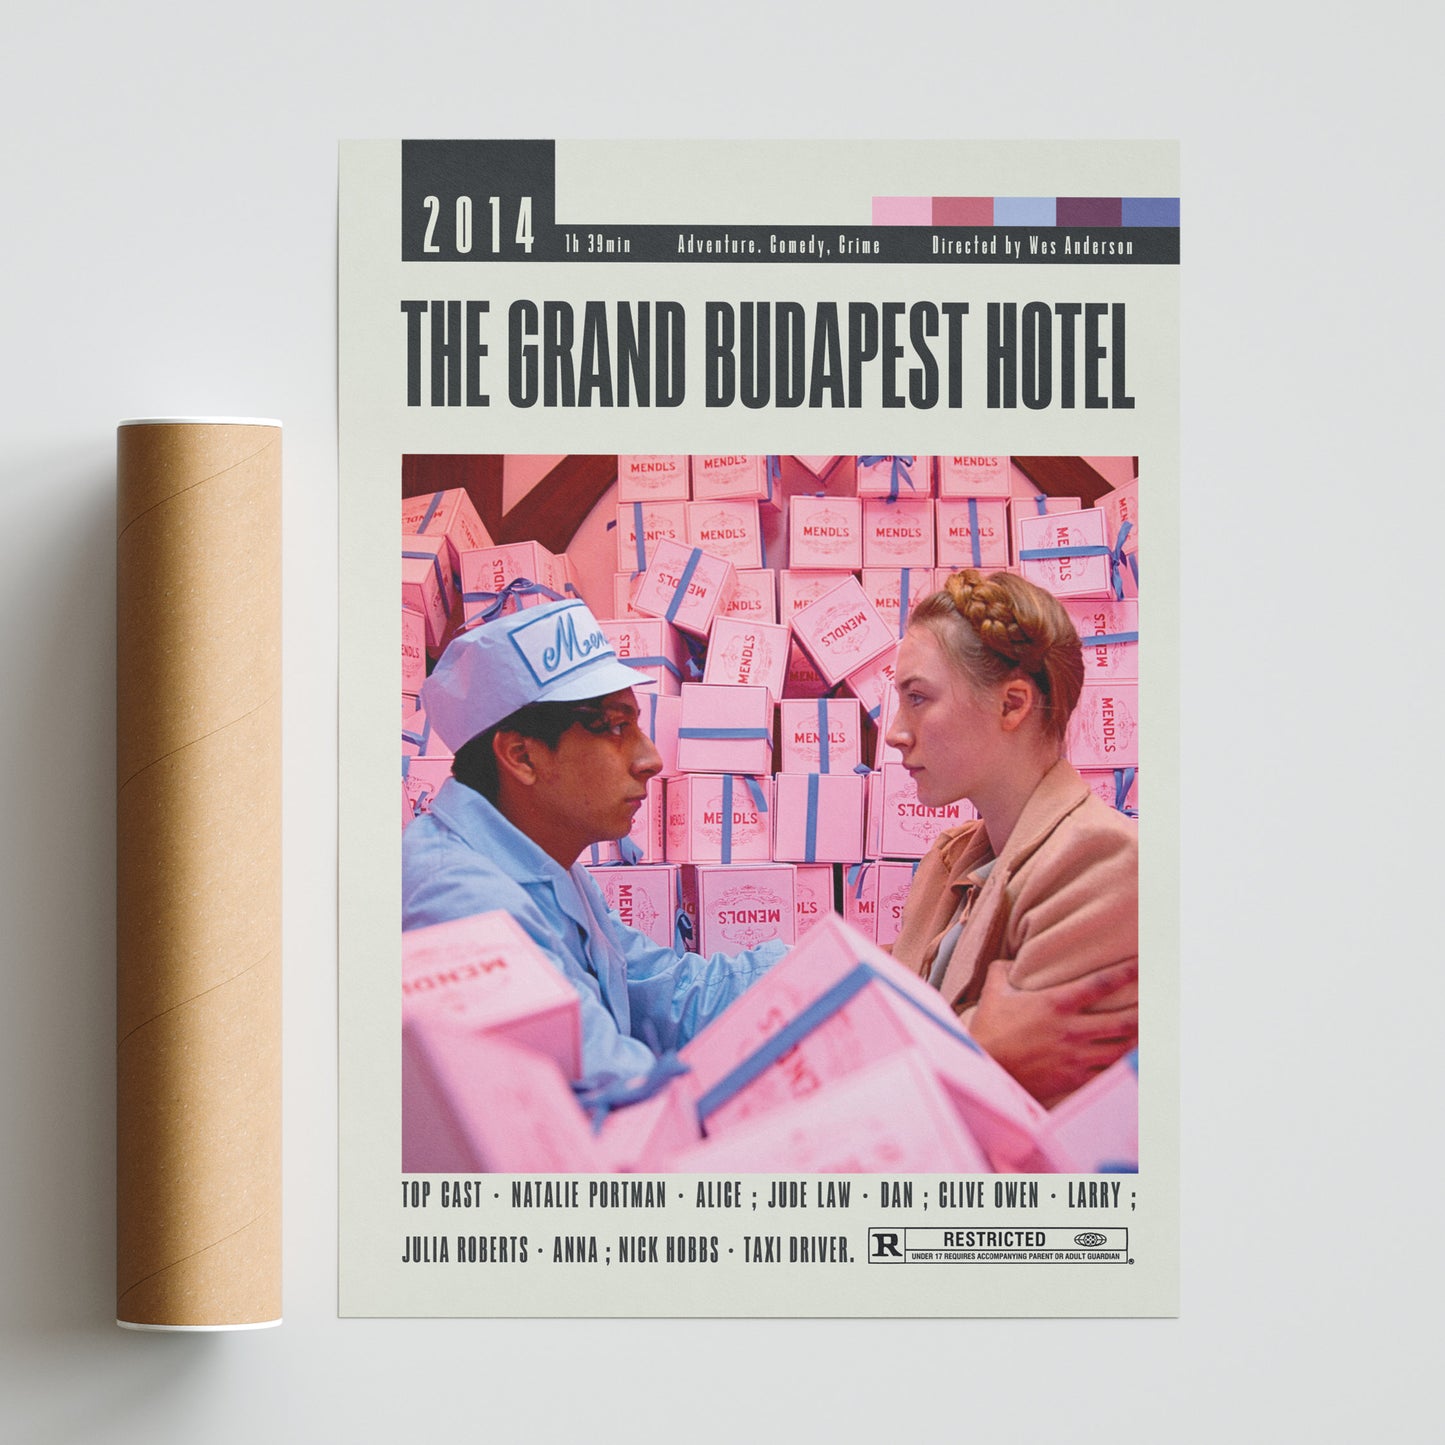 Unleash your love for Wes Anderson's films with our exclusive collection of vintage-style movie posters from The Grand Budapest Hotel. Available in large and unframed options, these custom and minimalist prints are perfect for adding a unique touch to your walls. Elevate your home decor with these affordable and original movie posters from UK.